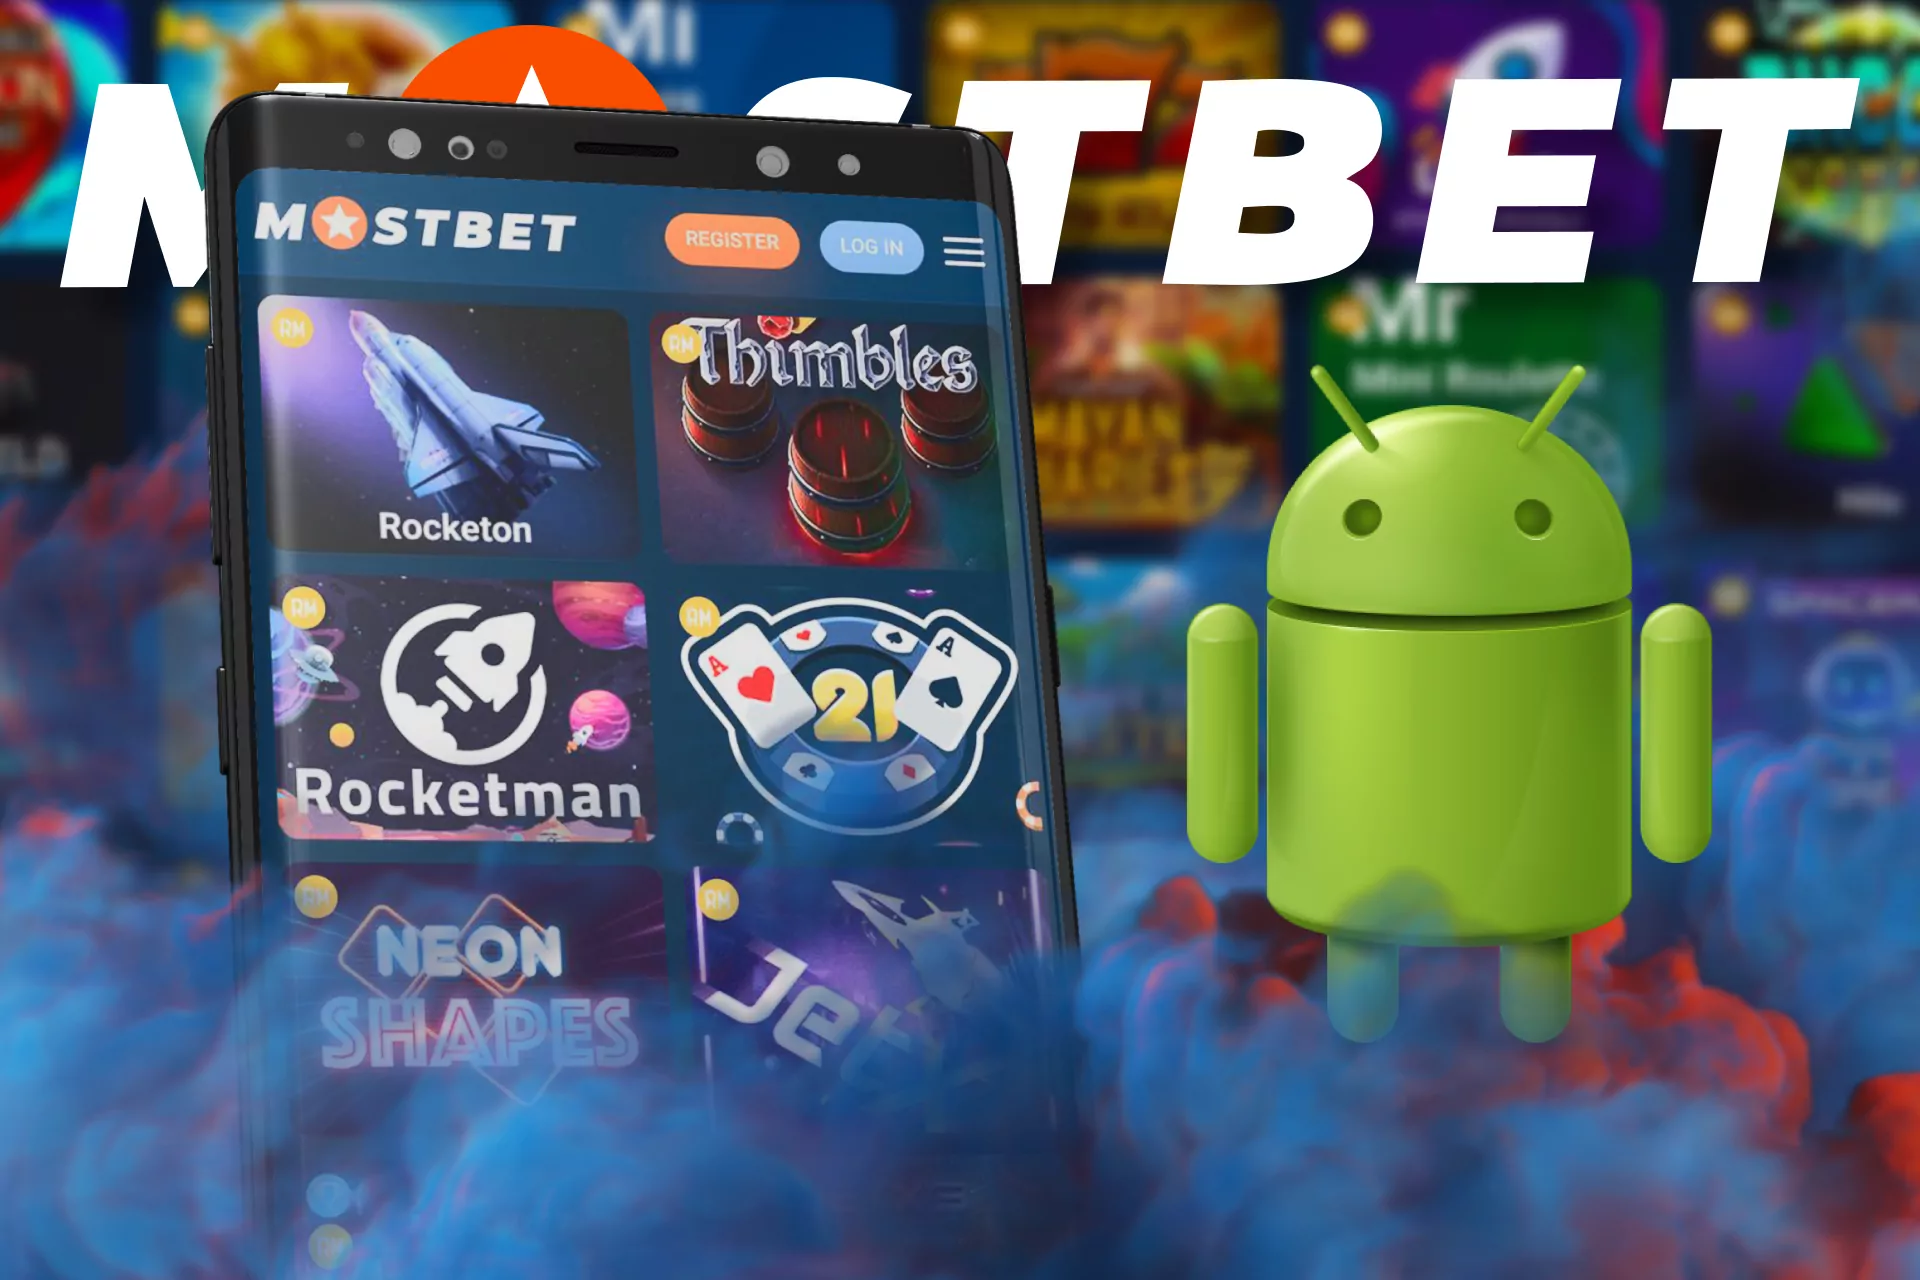 With Mostbet, play games on your Android mobile.